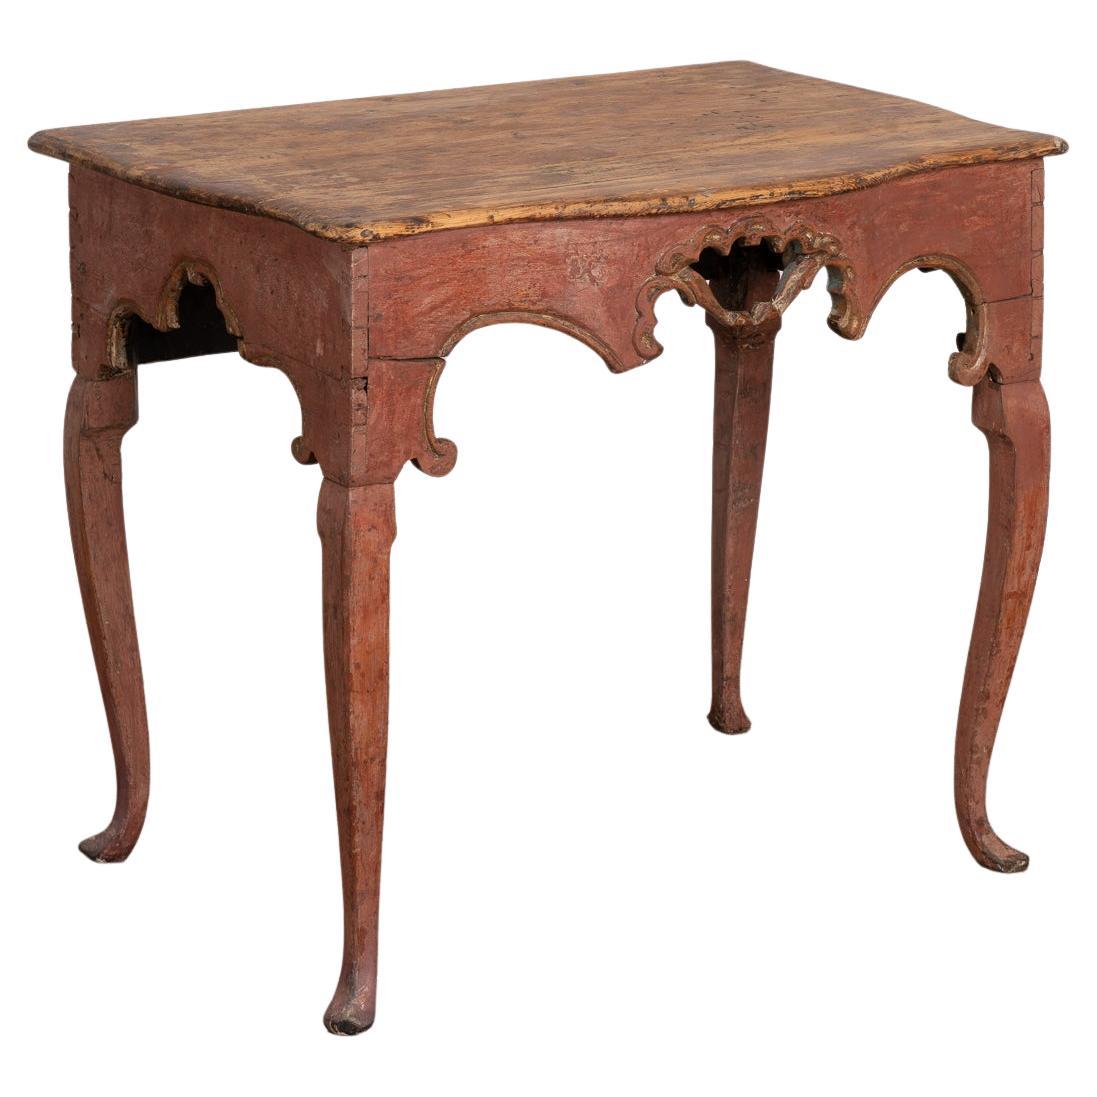 Original Red Painted Pine Rococo Side Table, Norway, circa 1750-1990